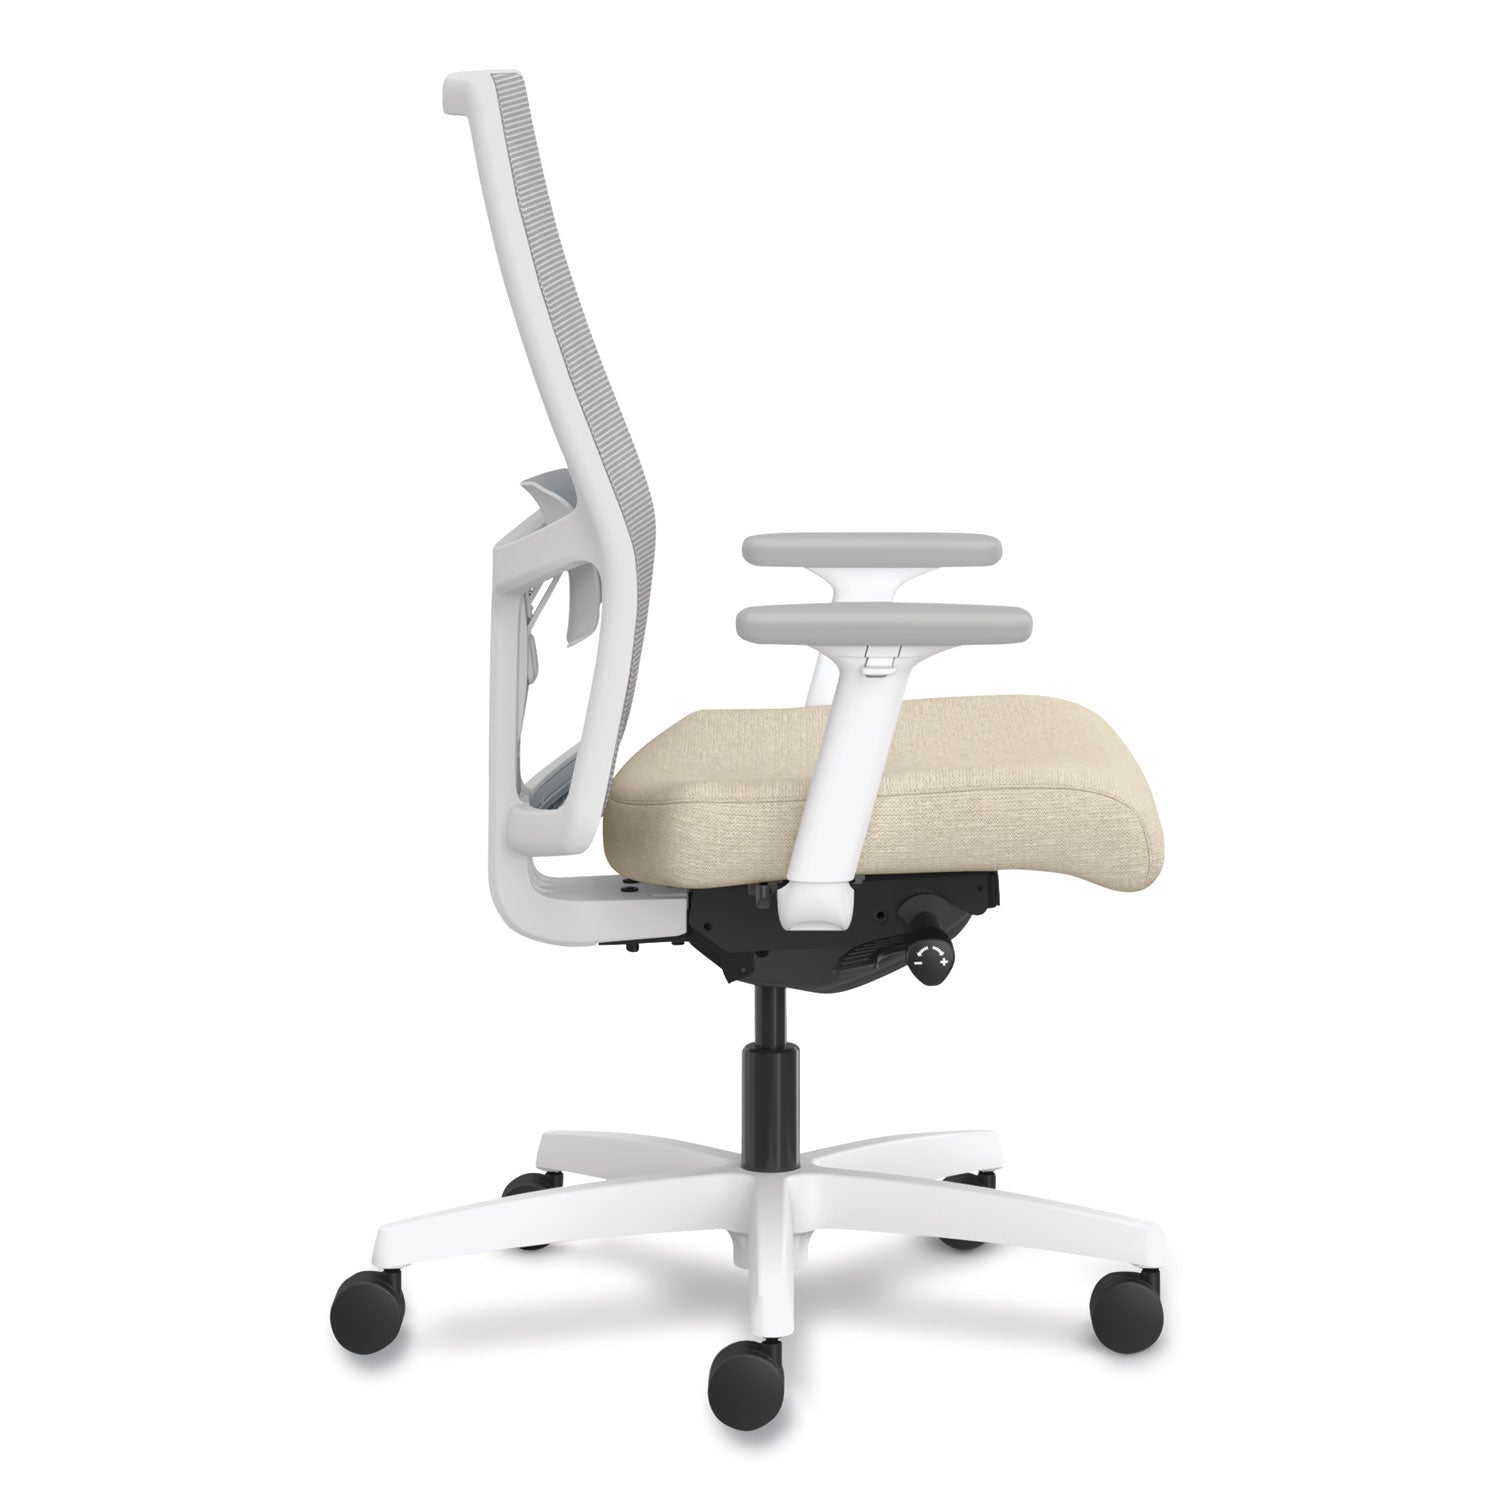 ignition-20-4-way-stretch-mid-back-task-chair-white-adjustable-lumbar-support-biscotti-fog-white-ships-in-7-10-bus-days_honi2mm2afh11wx - 4